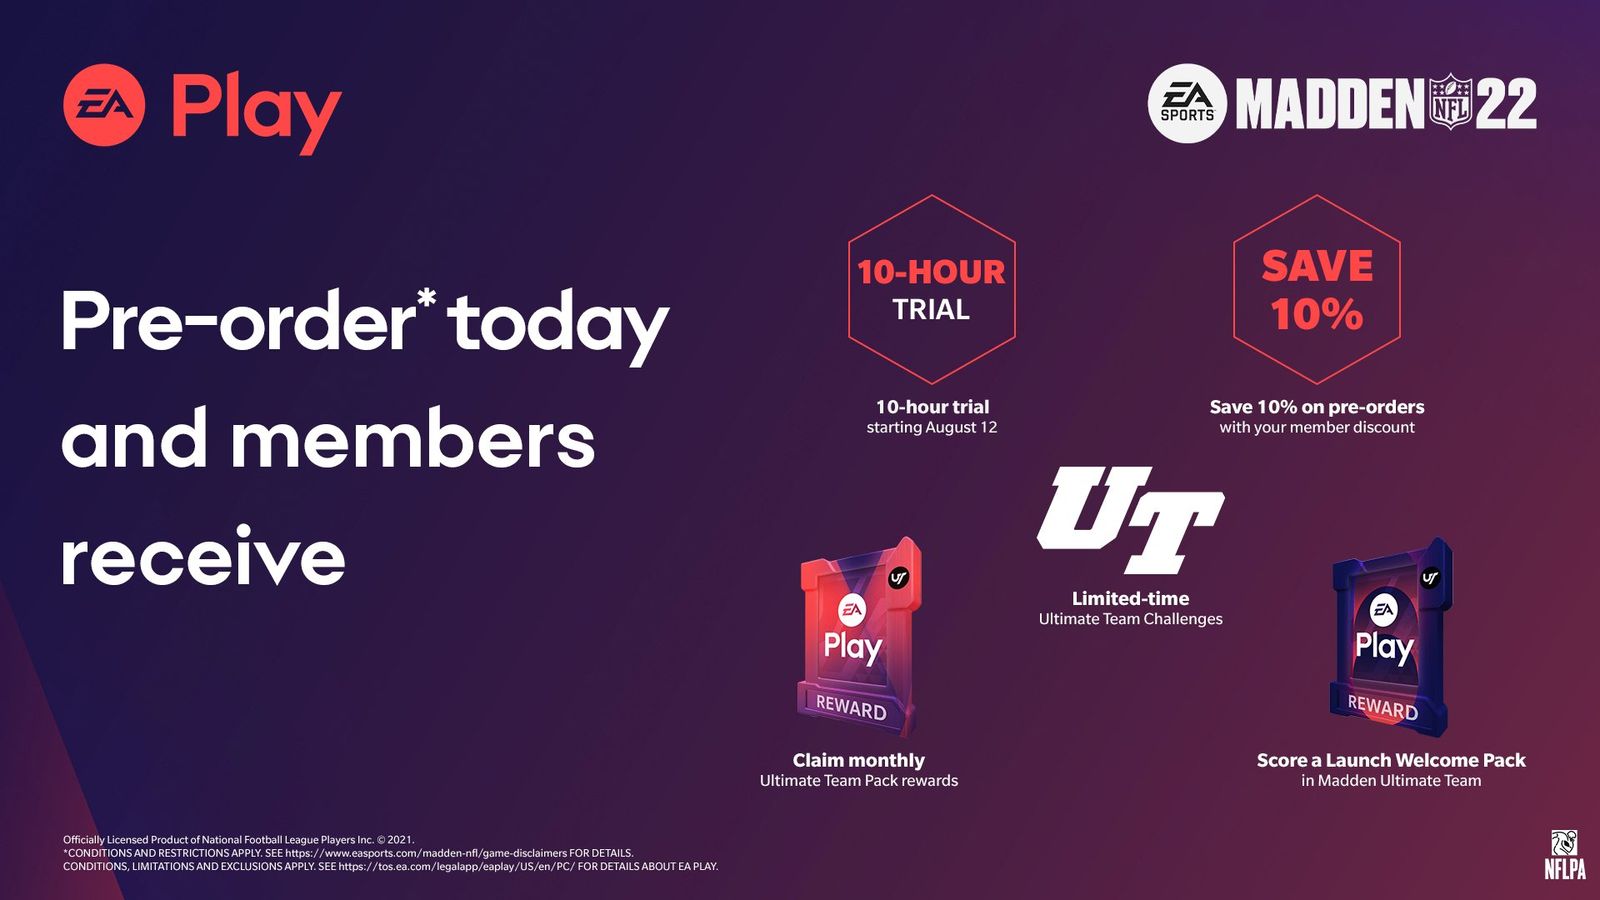 The detailed EA Play rewards available to members